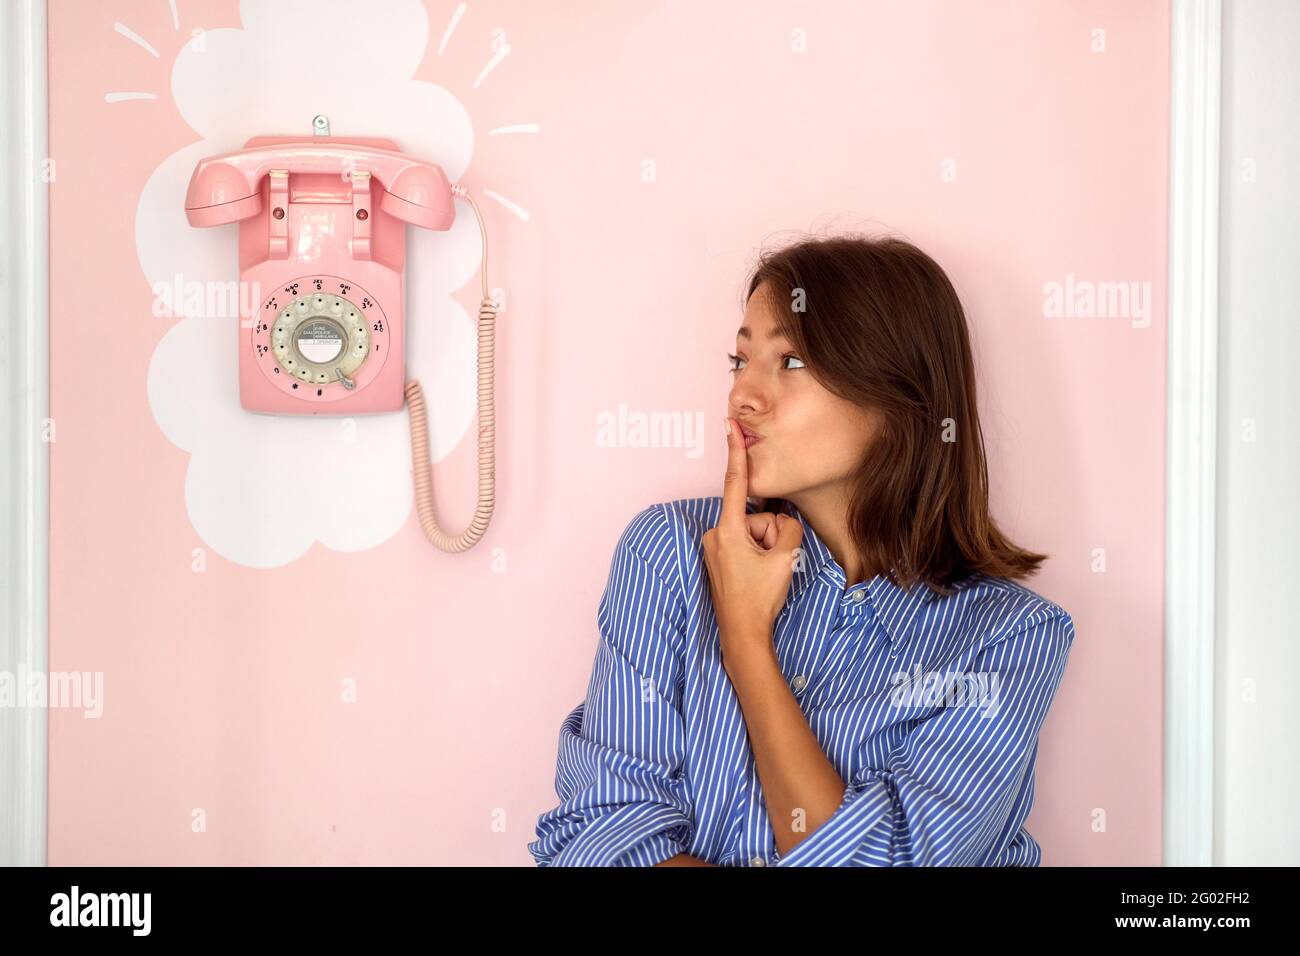 Lovely brunette isolated on a retro pink background Stock Photo